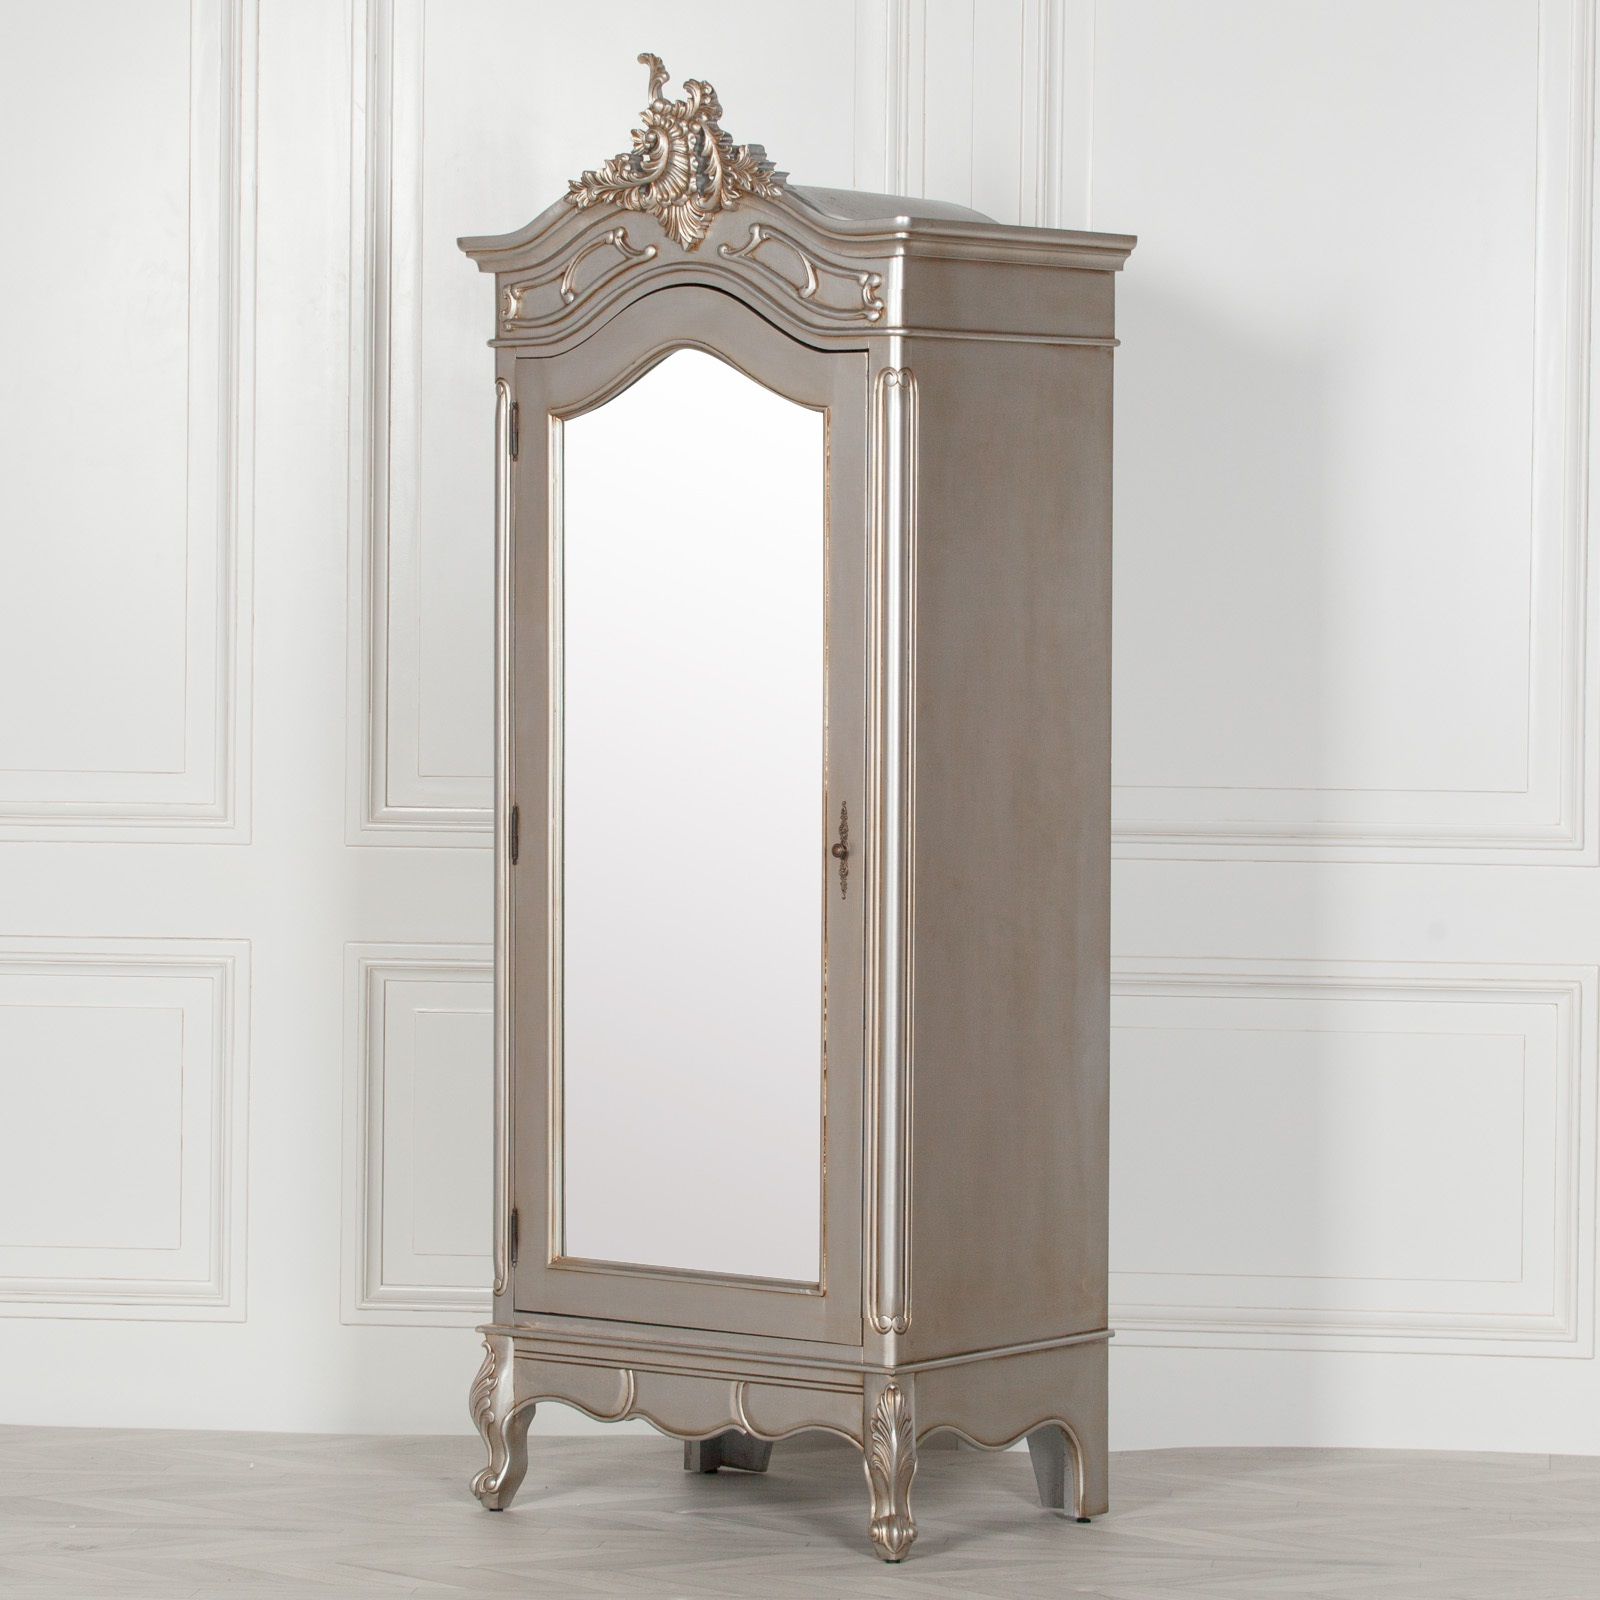 French Style Antique Silver Armoire Wardrobe Mirror Door Intended For Single French Wardrobes (Gallery 14 of 20)